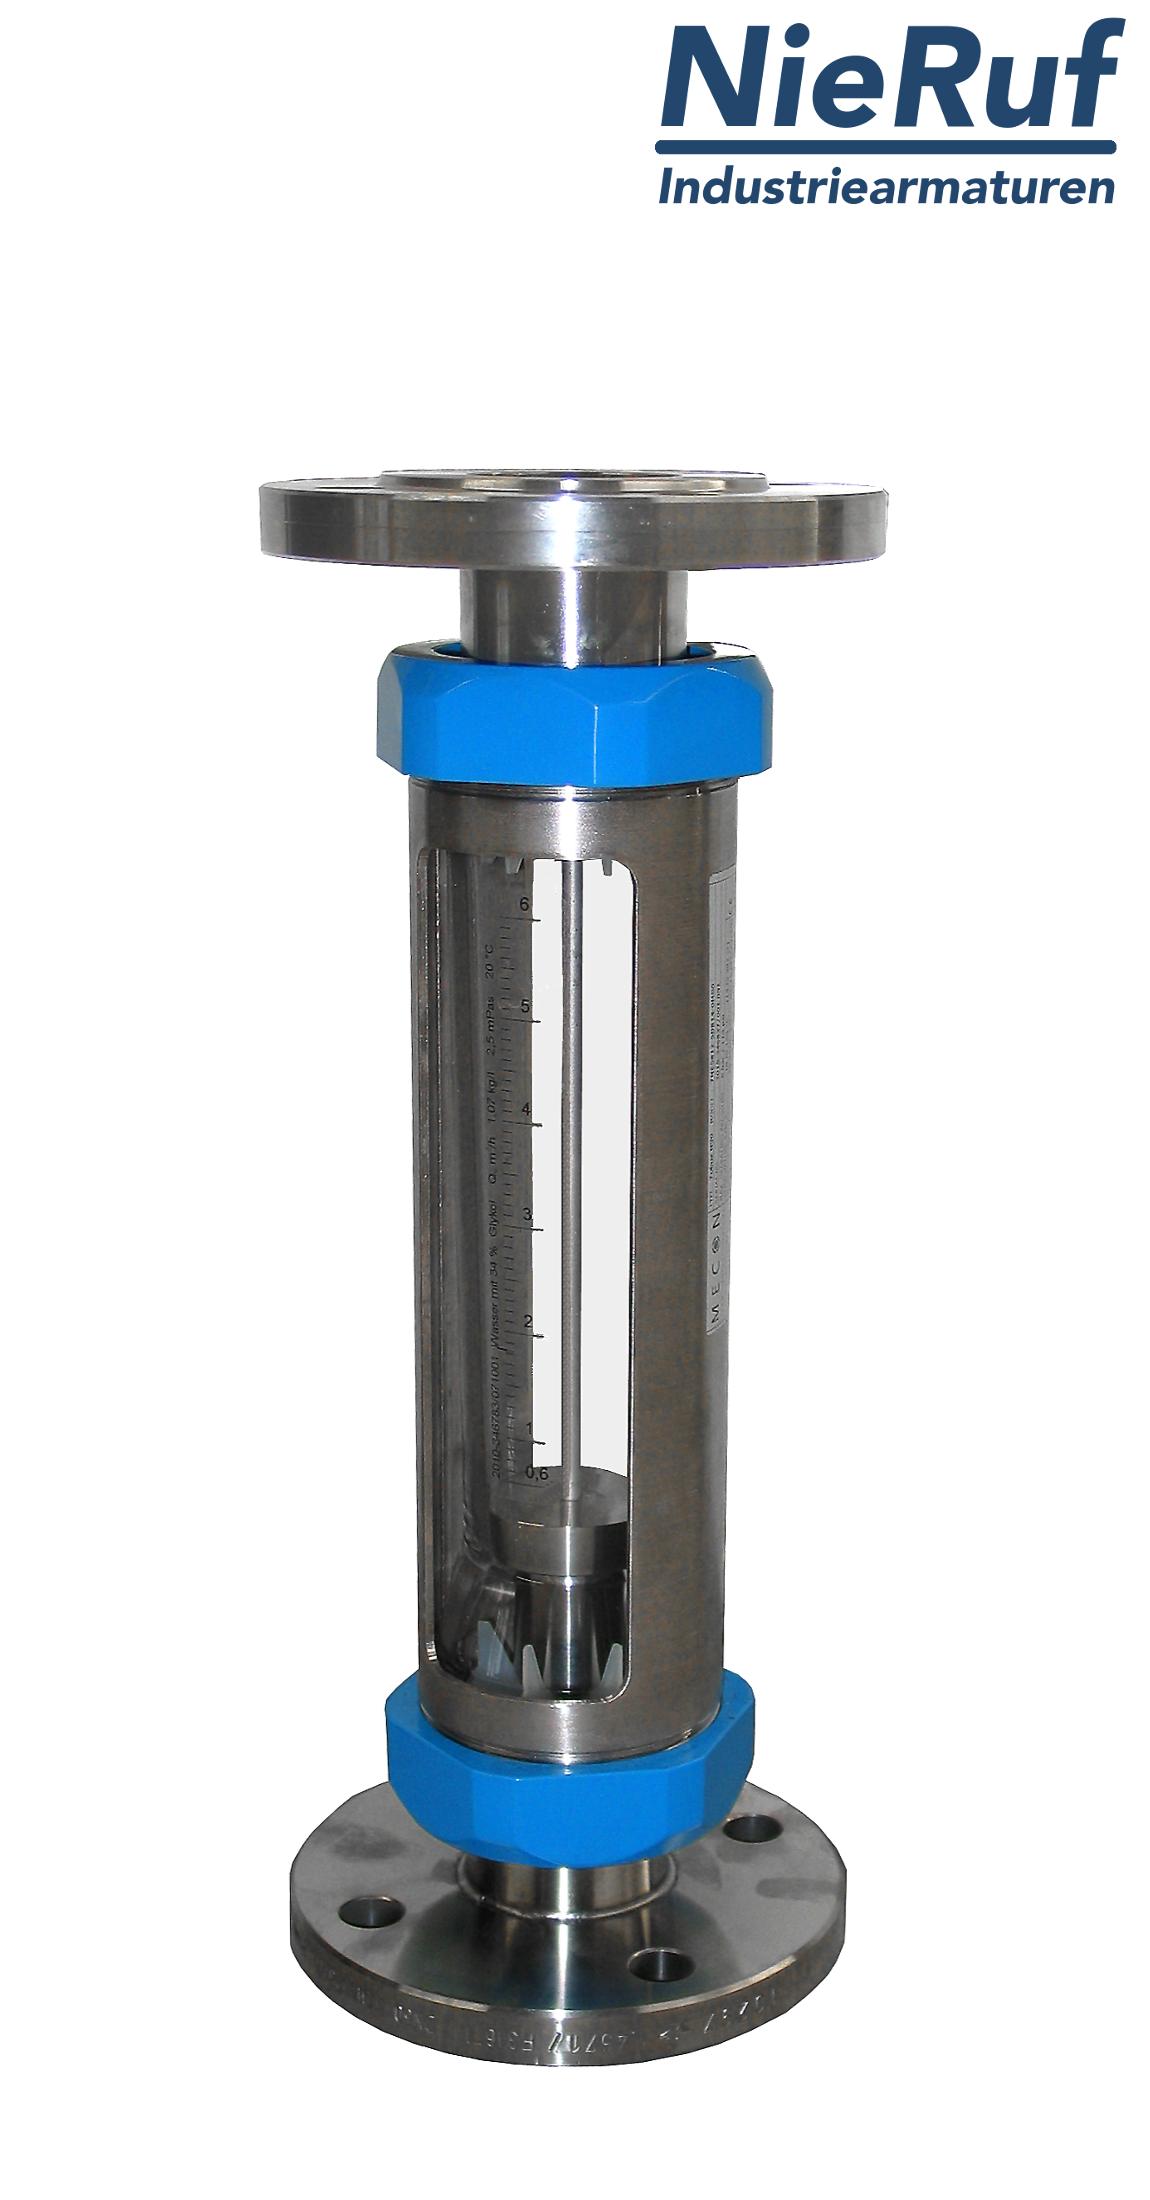 Variable area flowmeter stainless steel + borosilicate flange DN20 0.1 - 1.0 l/h water FKM